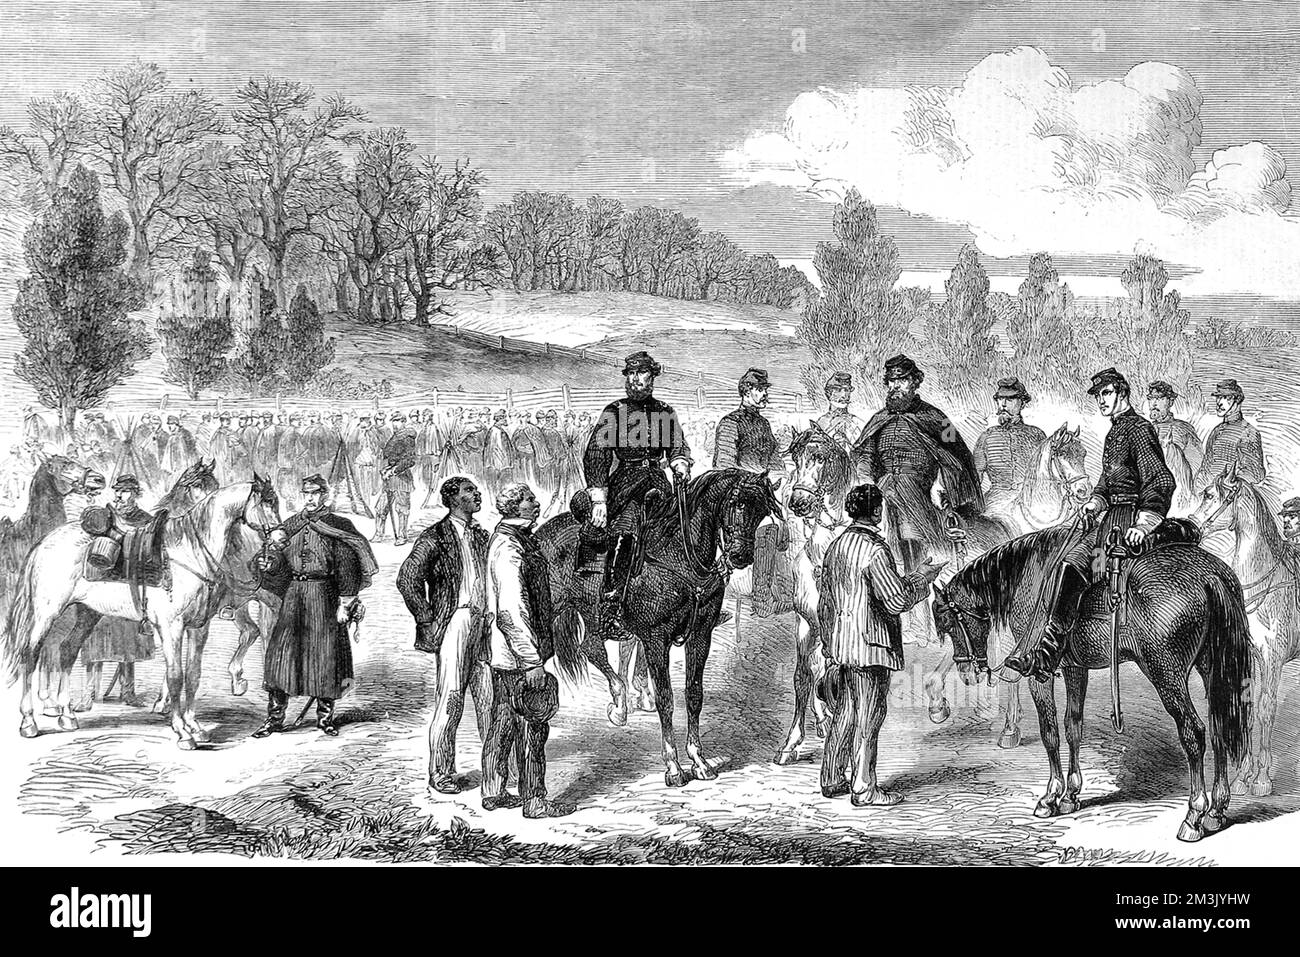 General Stoneman, accompanied by the Comte de Paris and the Duc de Chartres, on a reconnaissance expedition to Cedar Run. The peninsular Campaign began when McLellan's Army of the Potomac advanced from Washington down the Potomac River to the south peninsular and Richmond, Virginia.     Date: 1862 Stock Photo